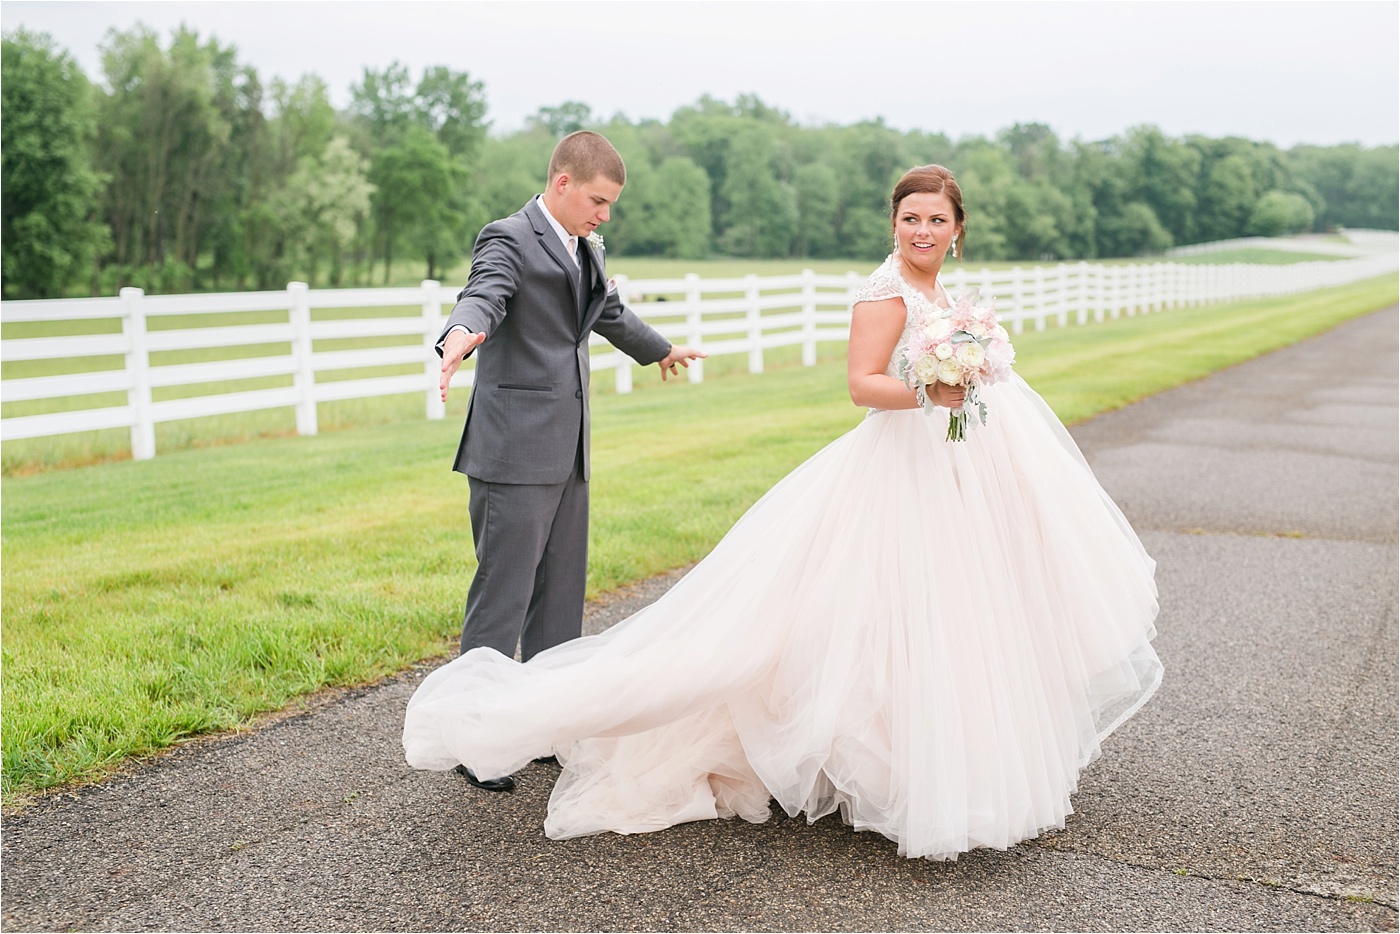 A Blush Outdoor wedding at Irongate Equestrian | KariMe Photography_0147